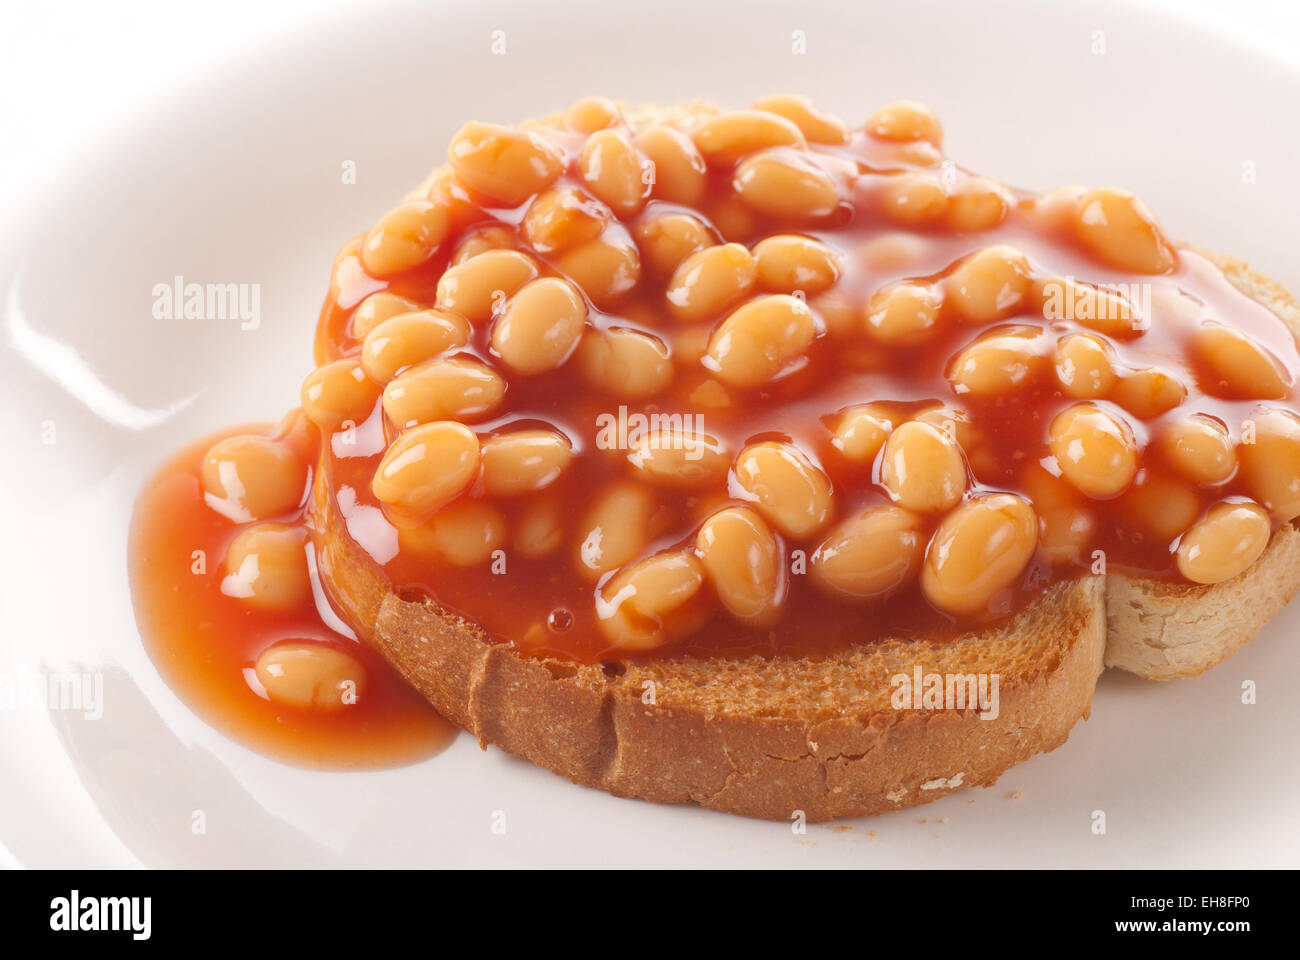 Baked beans on roasted bread. Stock Photo